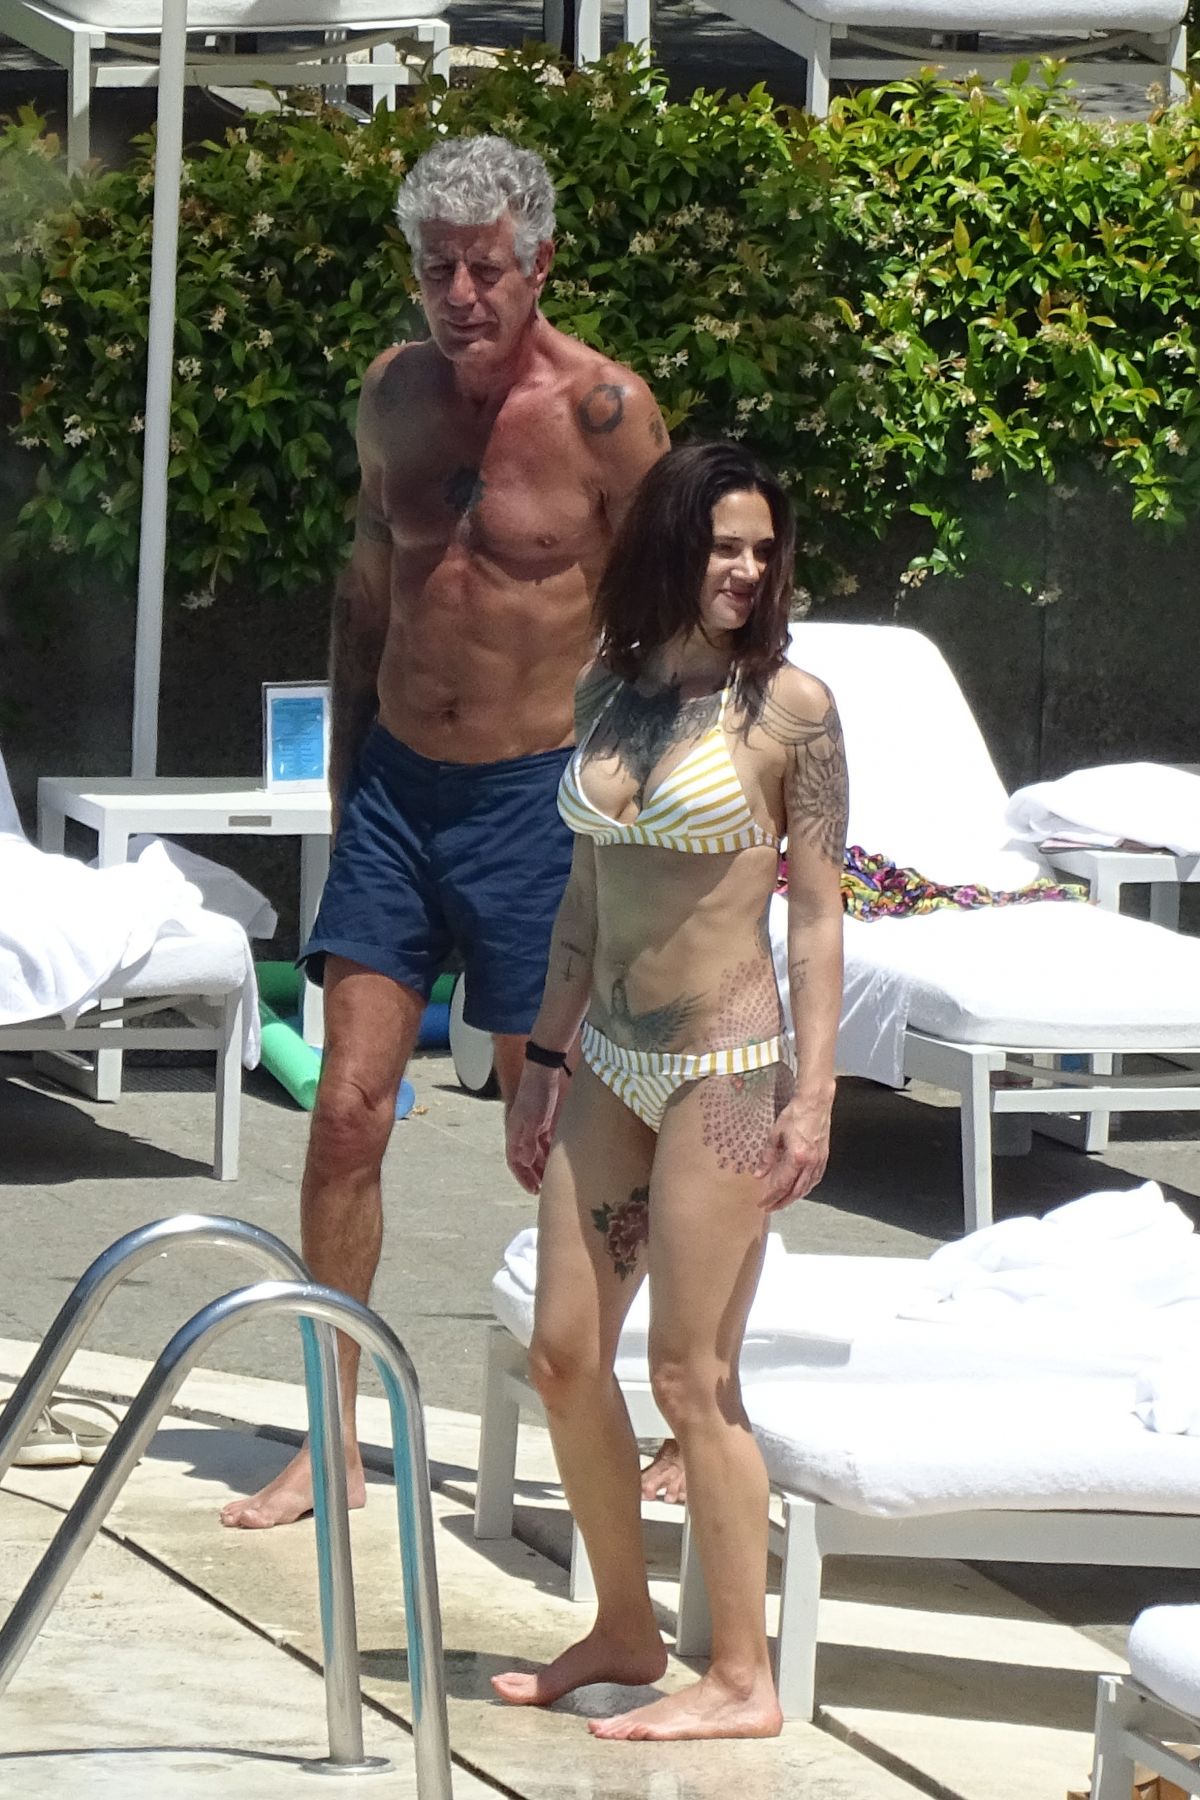 ASIA ARGENTO in Bikini and Anthony Bourdain at a Pool in Rome 09/20/2017.